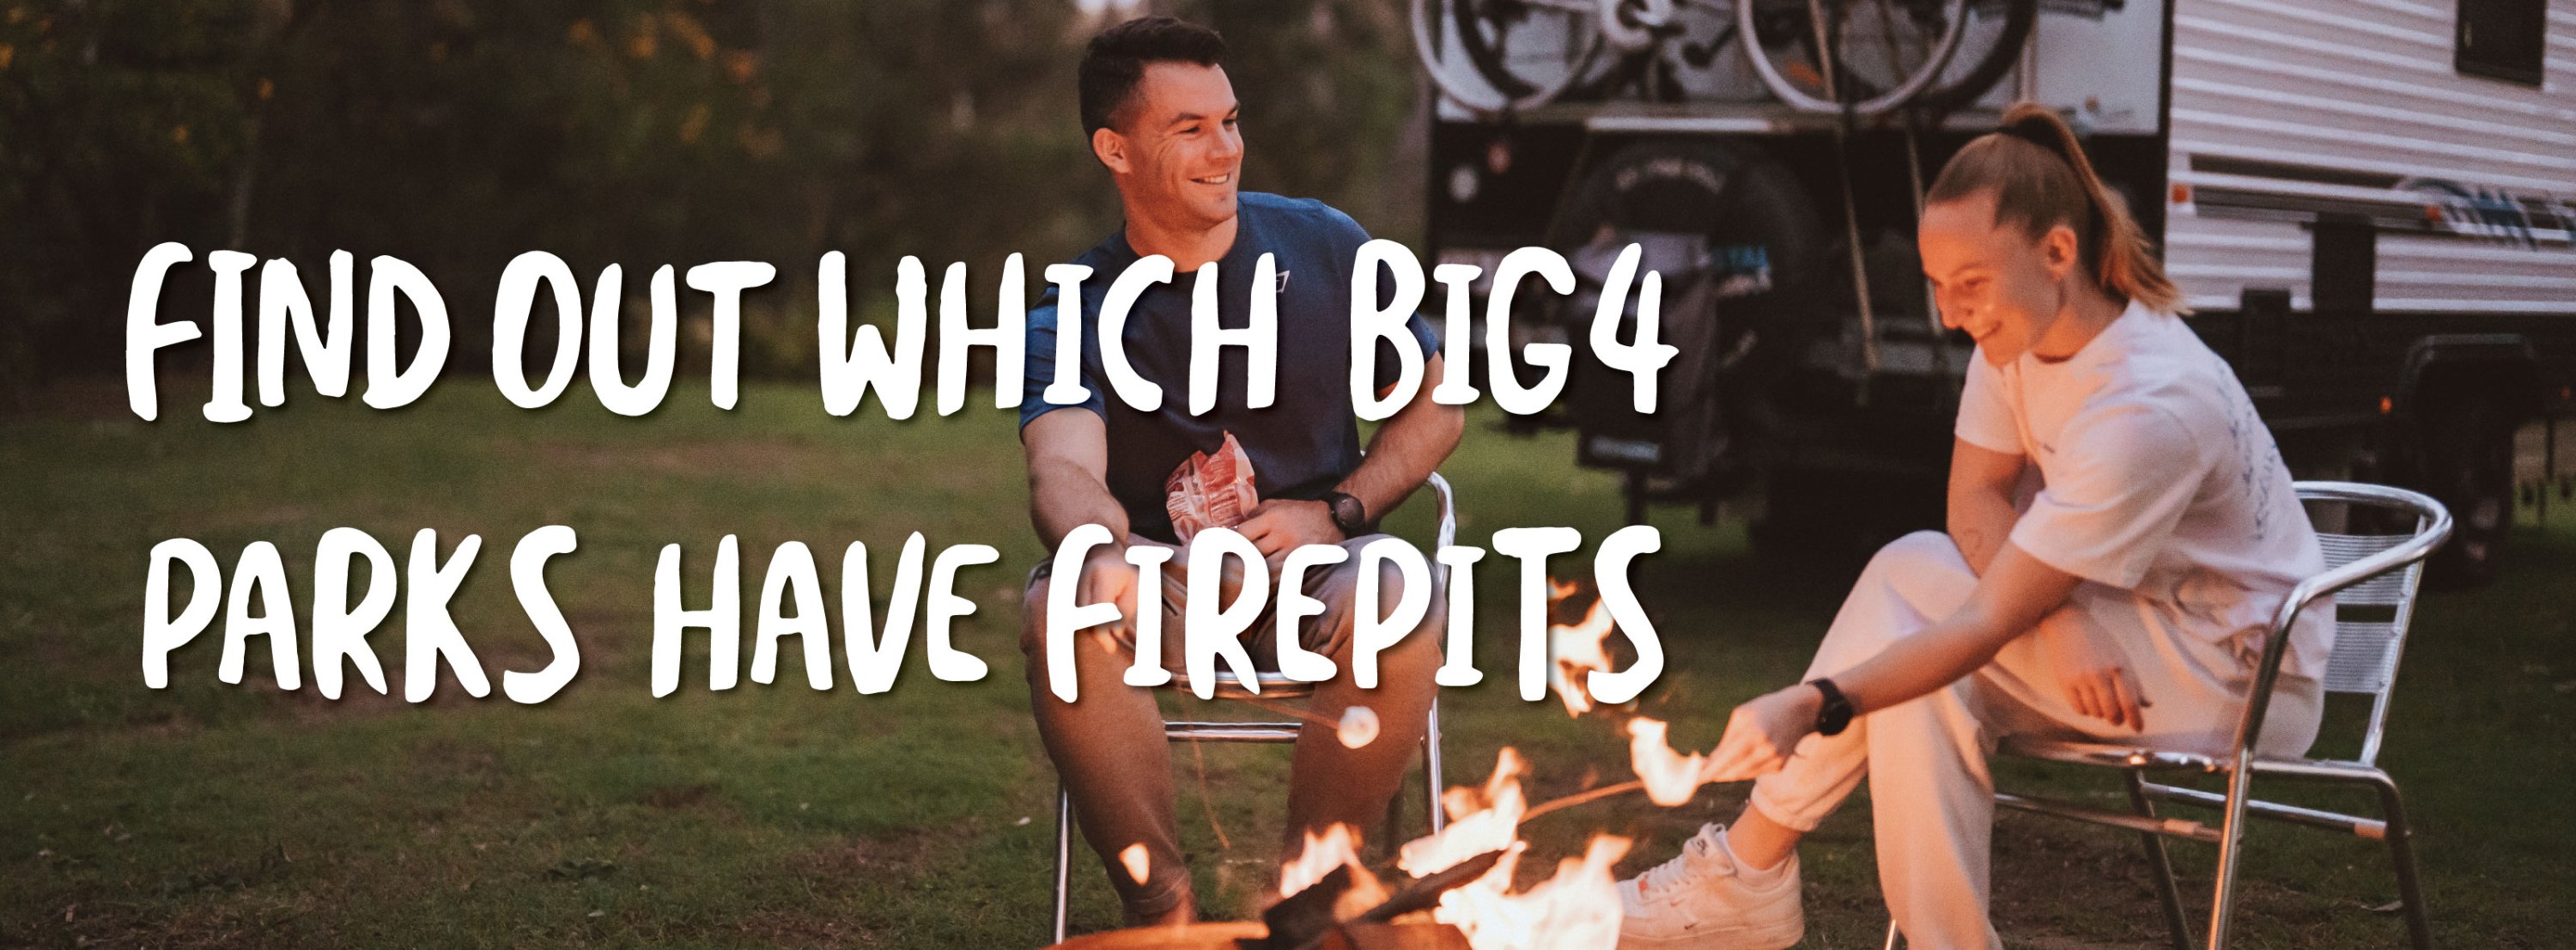 BIG4-PARKS-WITH-FIREPITS-BANNER-3200X1080PX.jpg